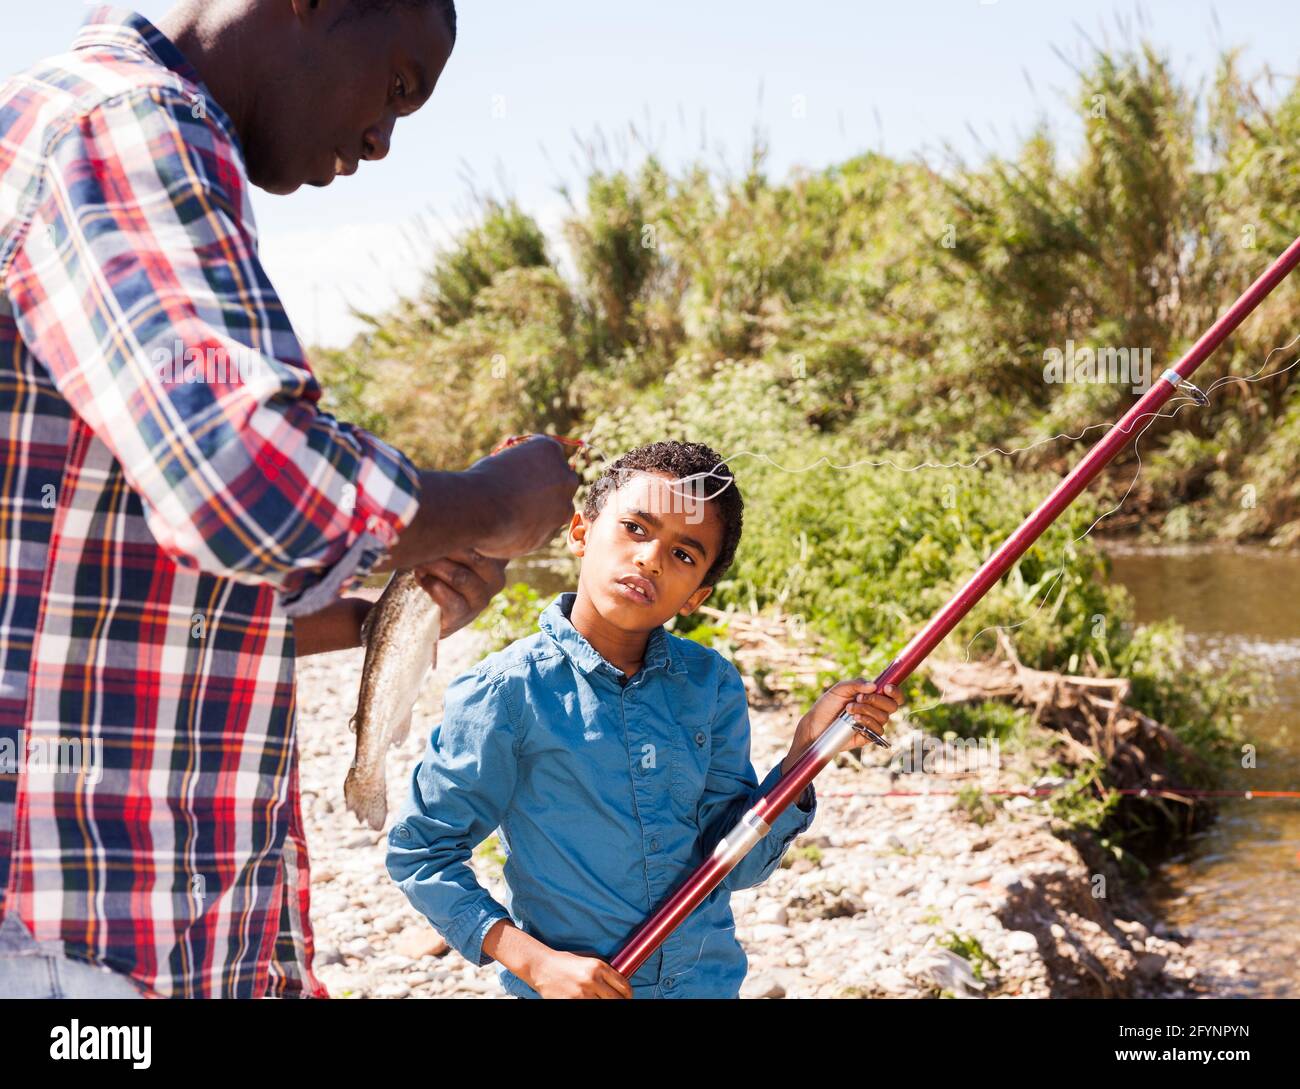 https://c8.alamy.com/comp/2FYNPYN/portrait-of-enthusiastic-little-african-boy-and-his-father-holding-fishing-rod-with-fish-on-hook-2FYNPYN.jpg